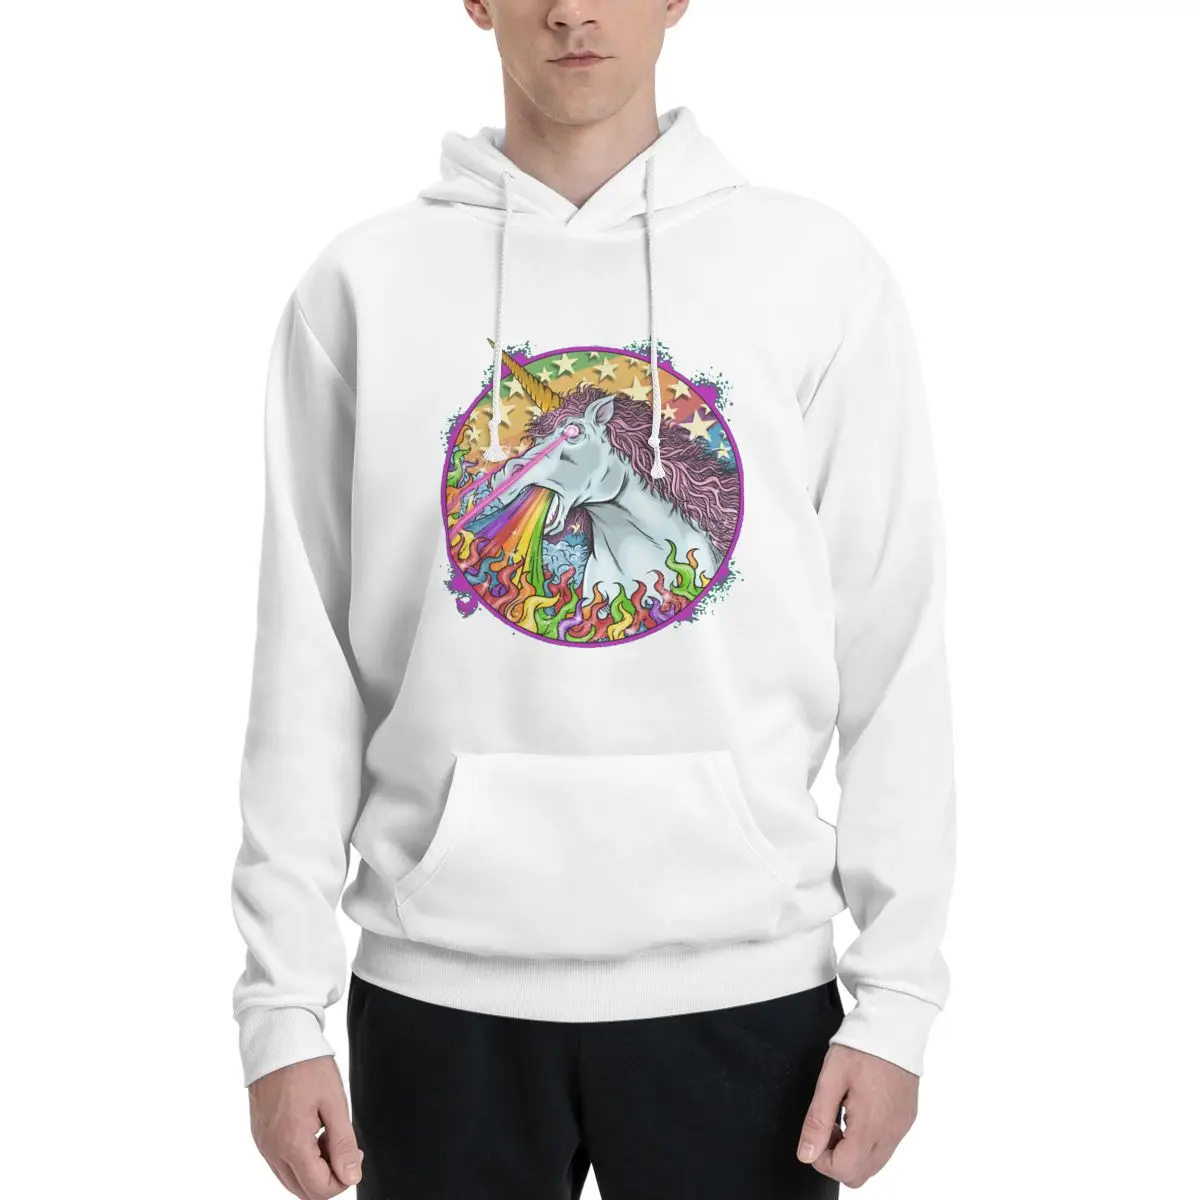 

Top Quality Divertidos De El Unicornio Unicorn Couples Plus Velvet Hooded Sweater High quality Fitness Kawaii With hood pullover